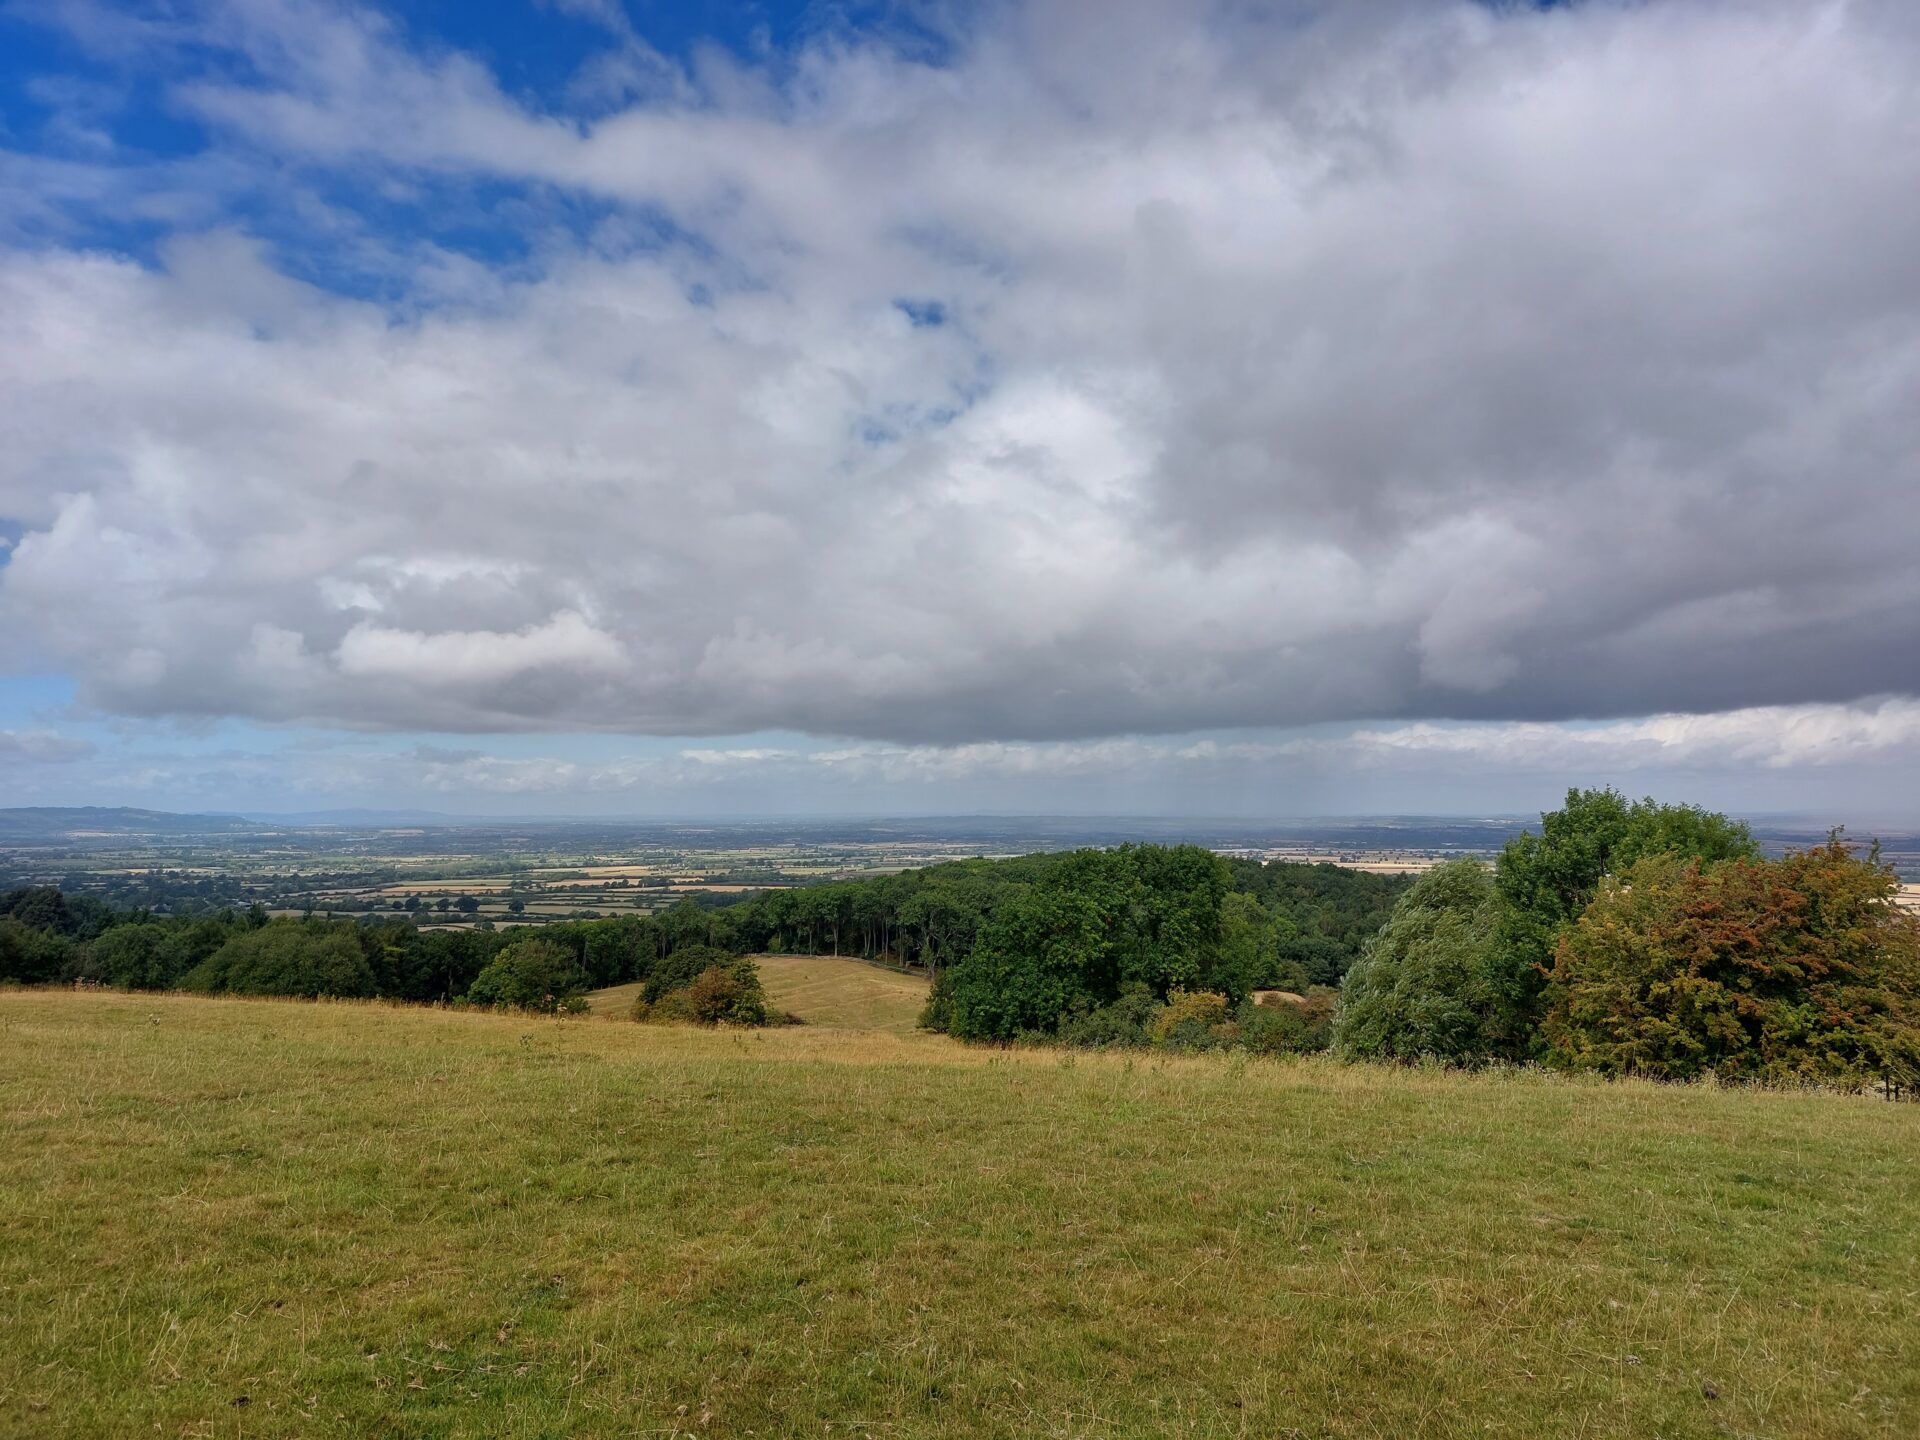 Glamping in Gloucestershire - great views of hills and skies